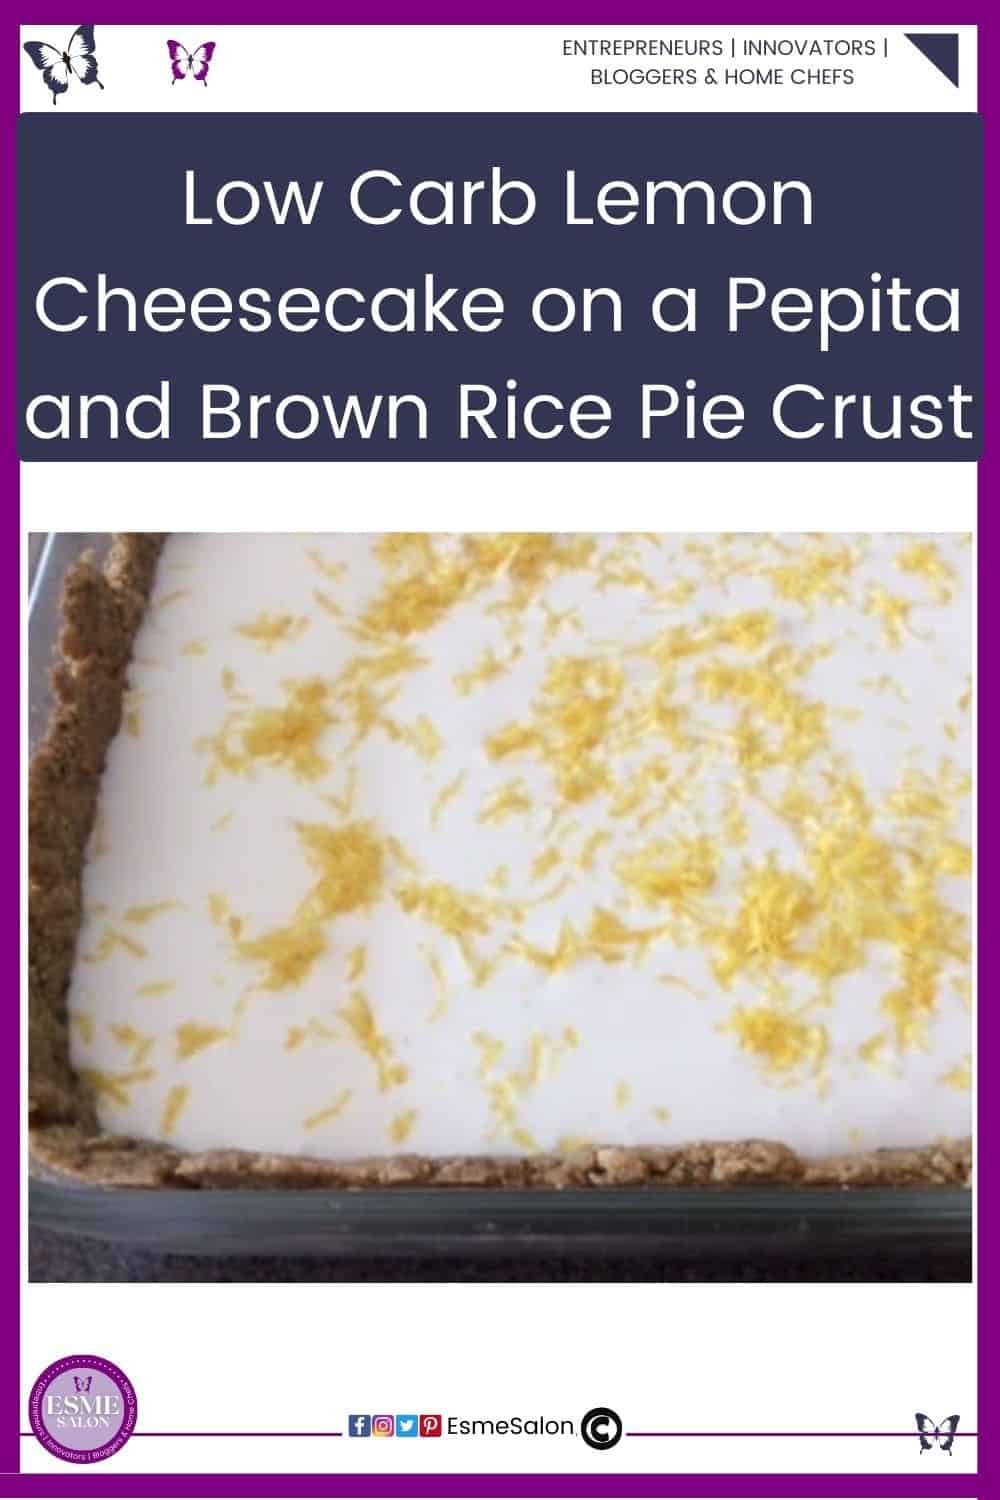 an image of the entire Low Carb Lemon Cheesecake on a Pepita and Brown Rice Pie Crust